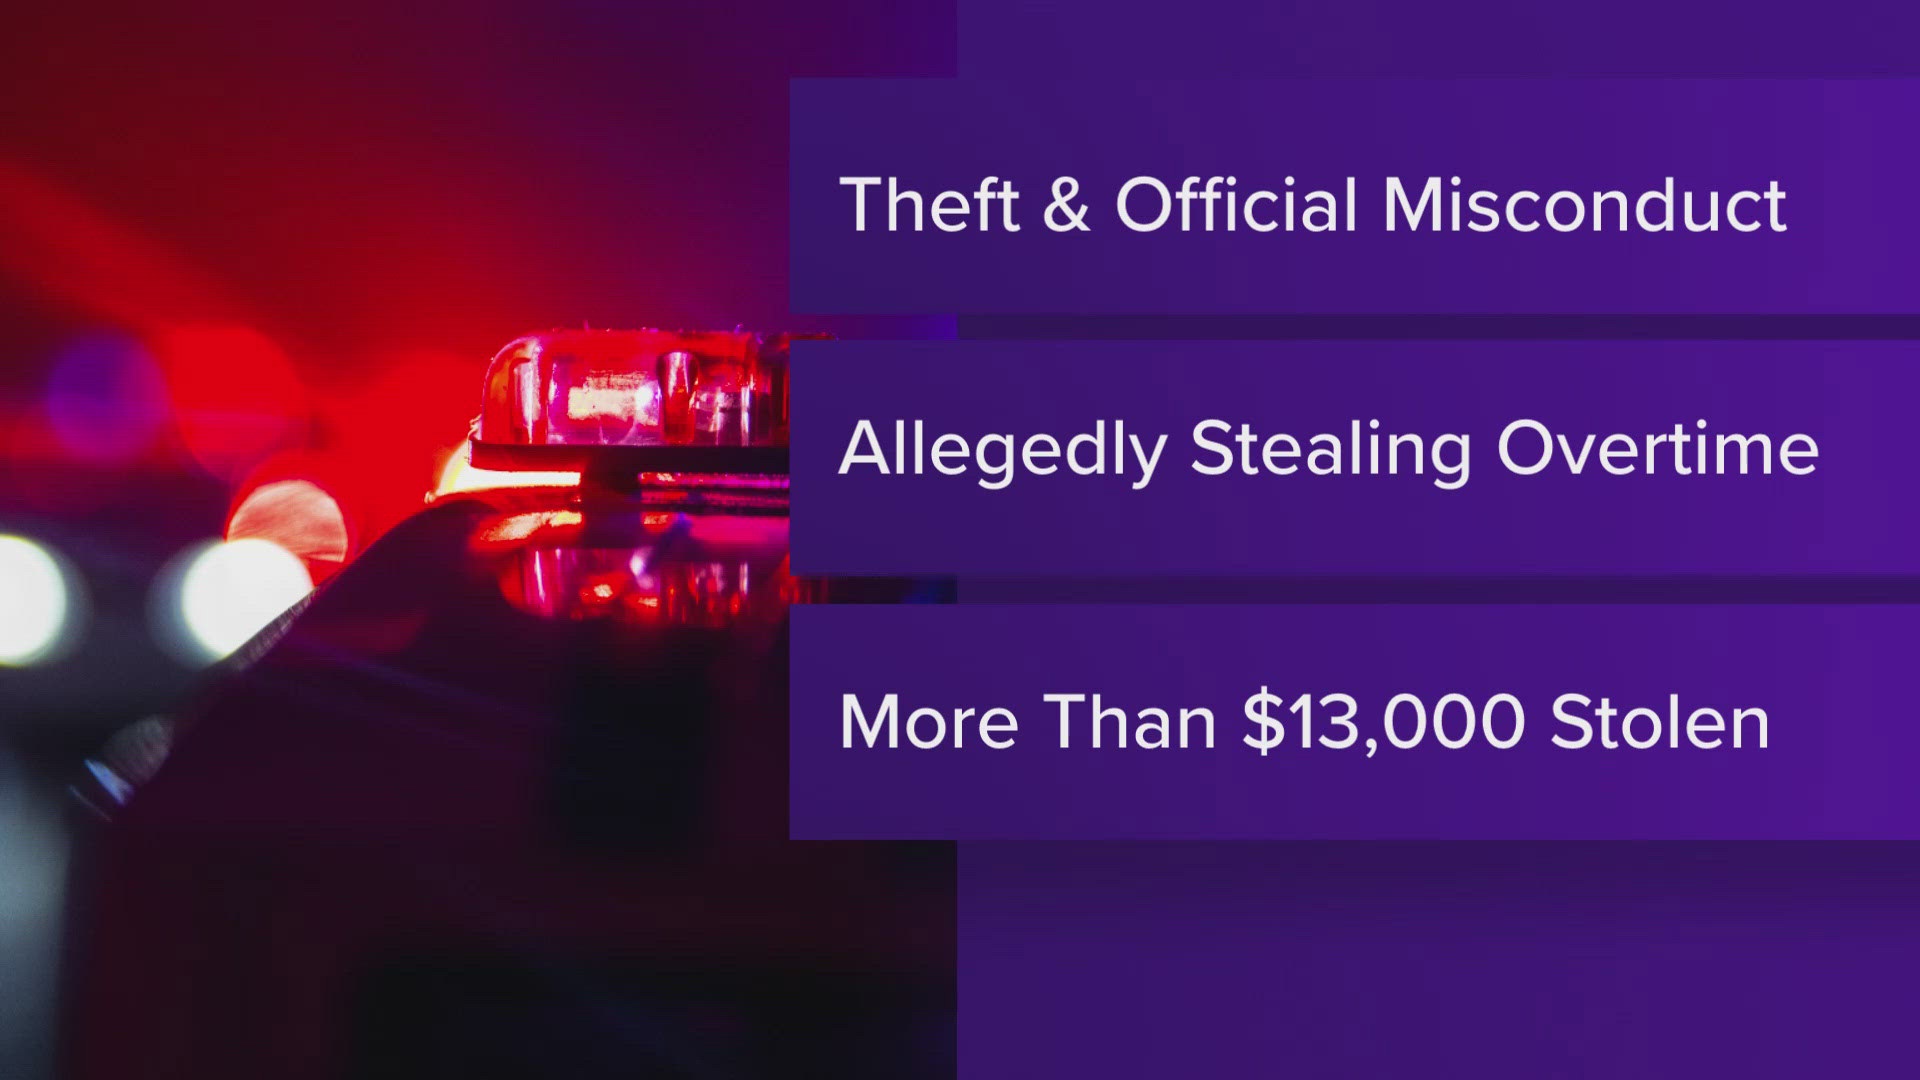 In total, the theft cost the office more than $13,000. All of the employees have been fired.